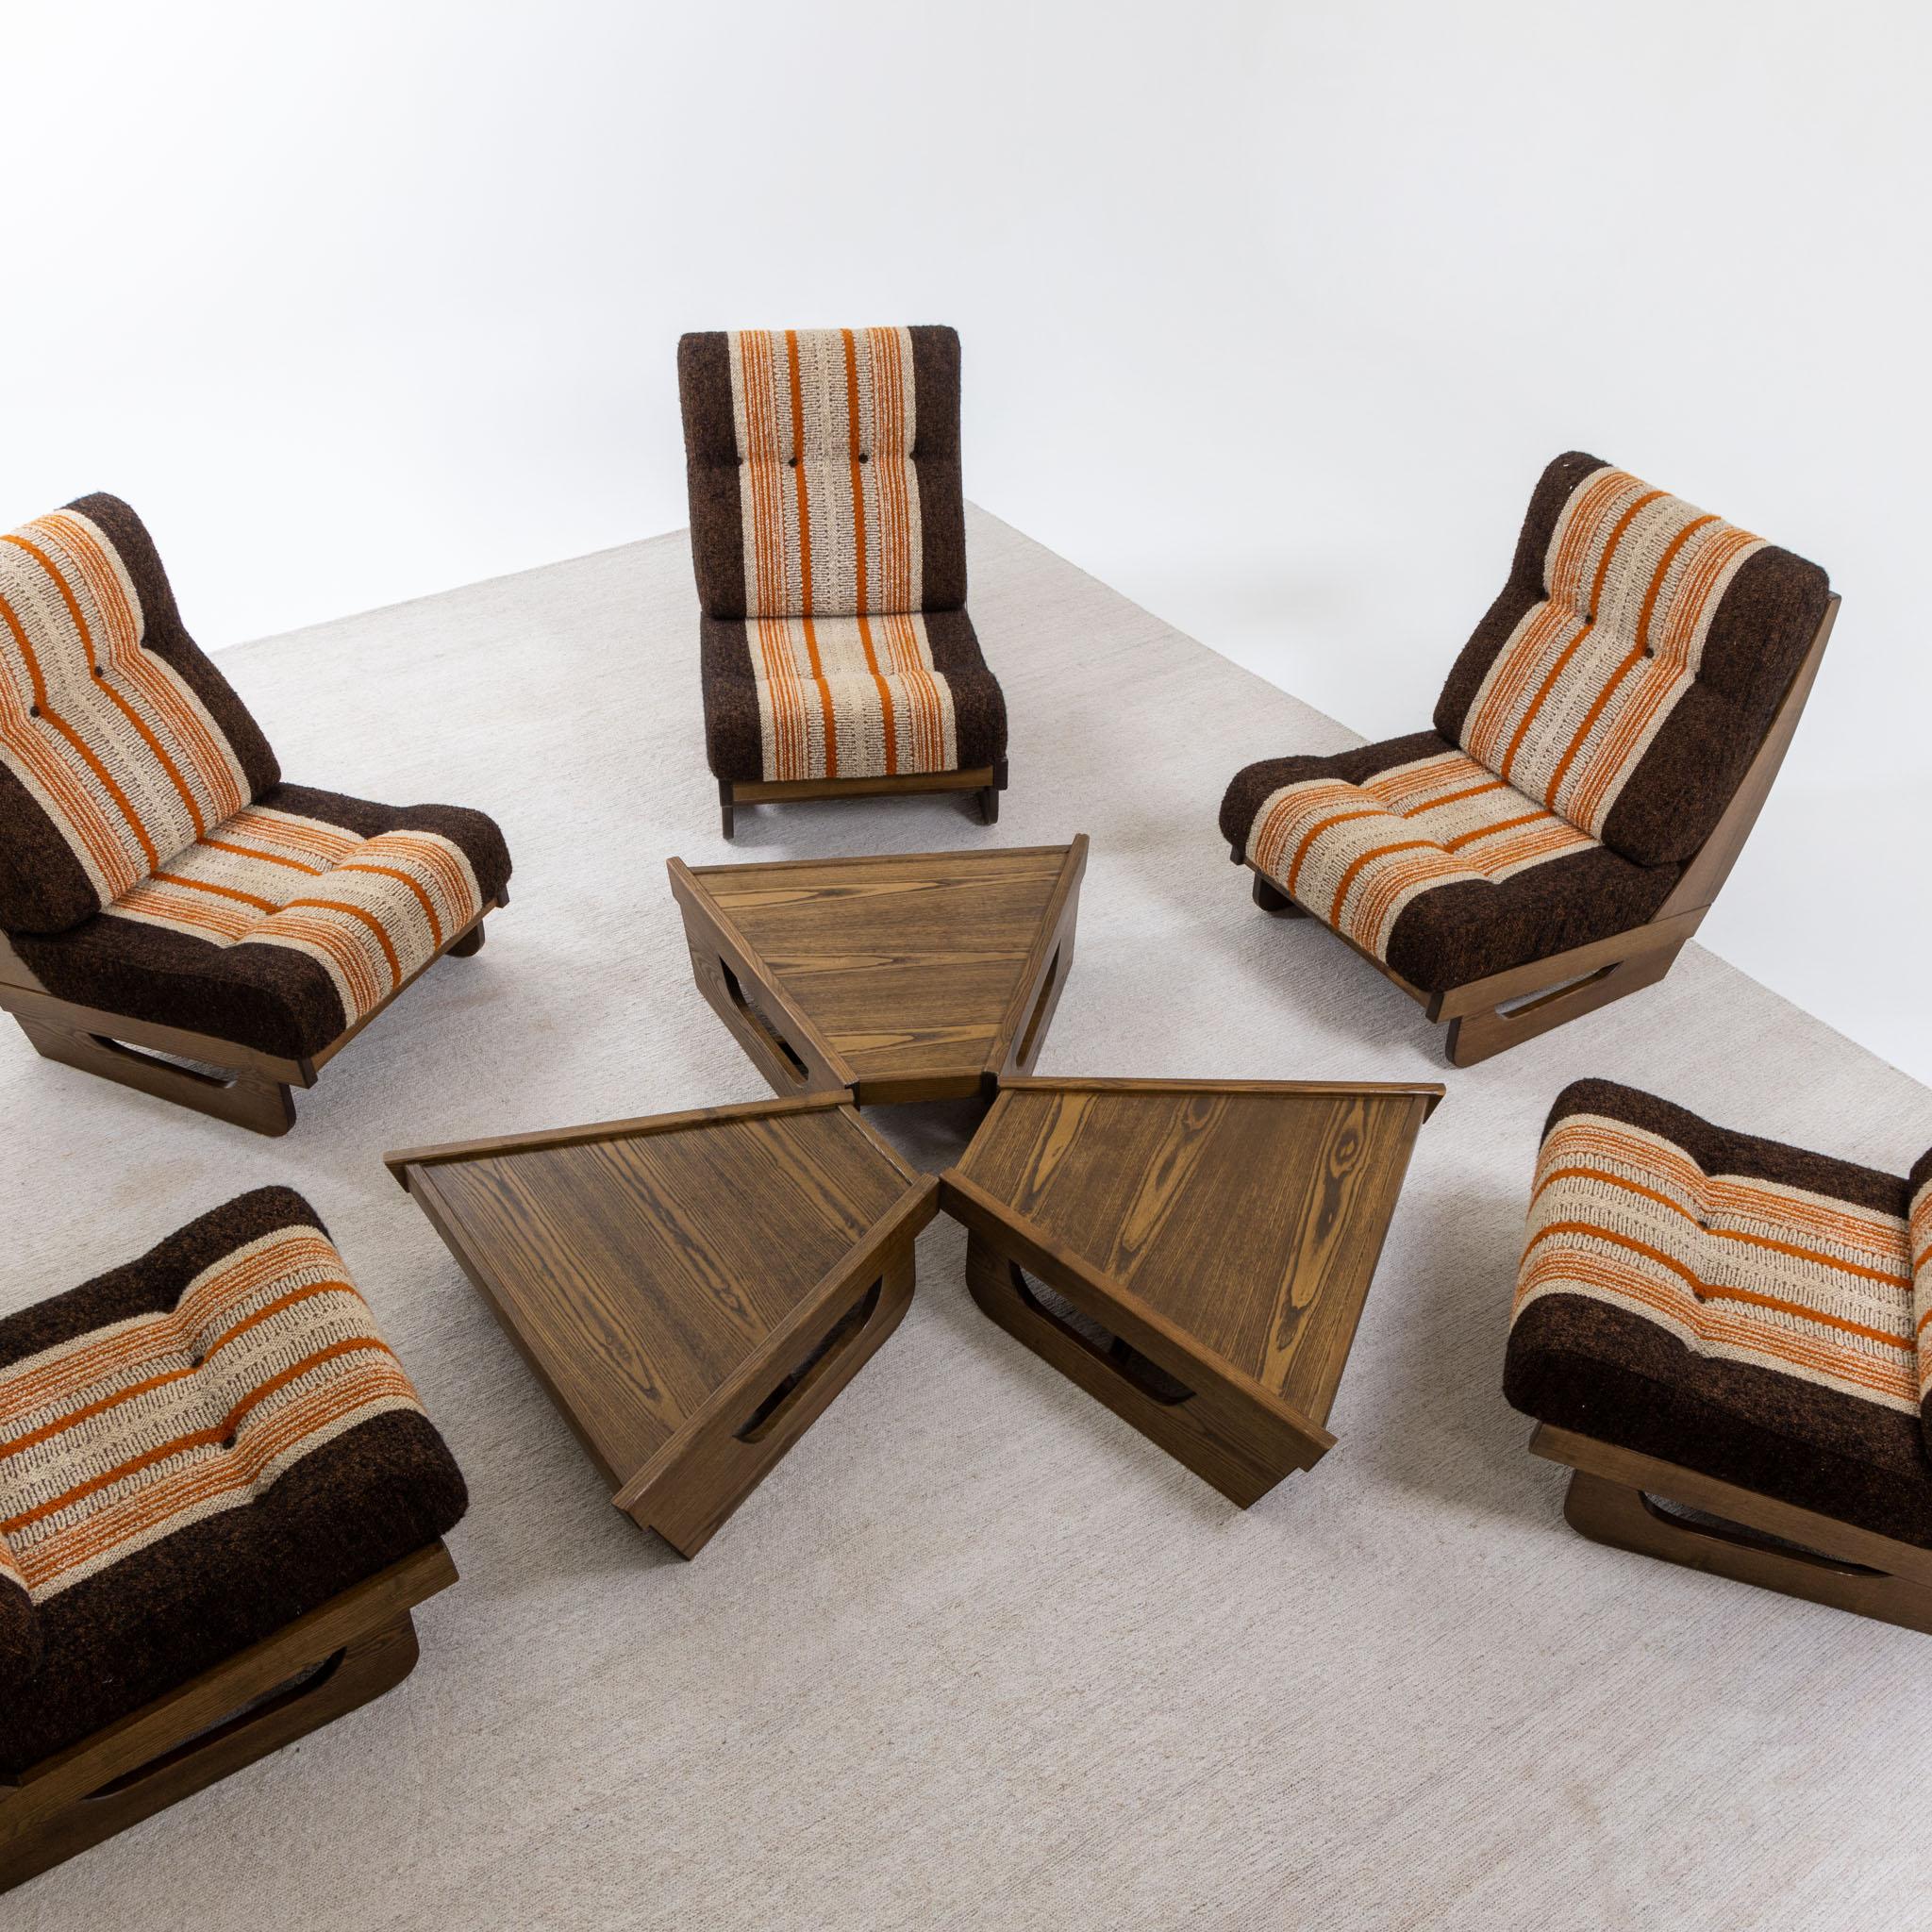 Modular Seating Group with five Lounge Chairs, Italy 1950s For Sale 3